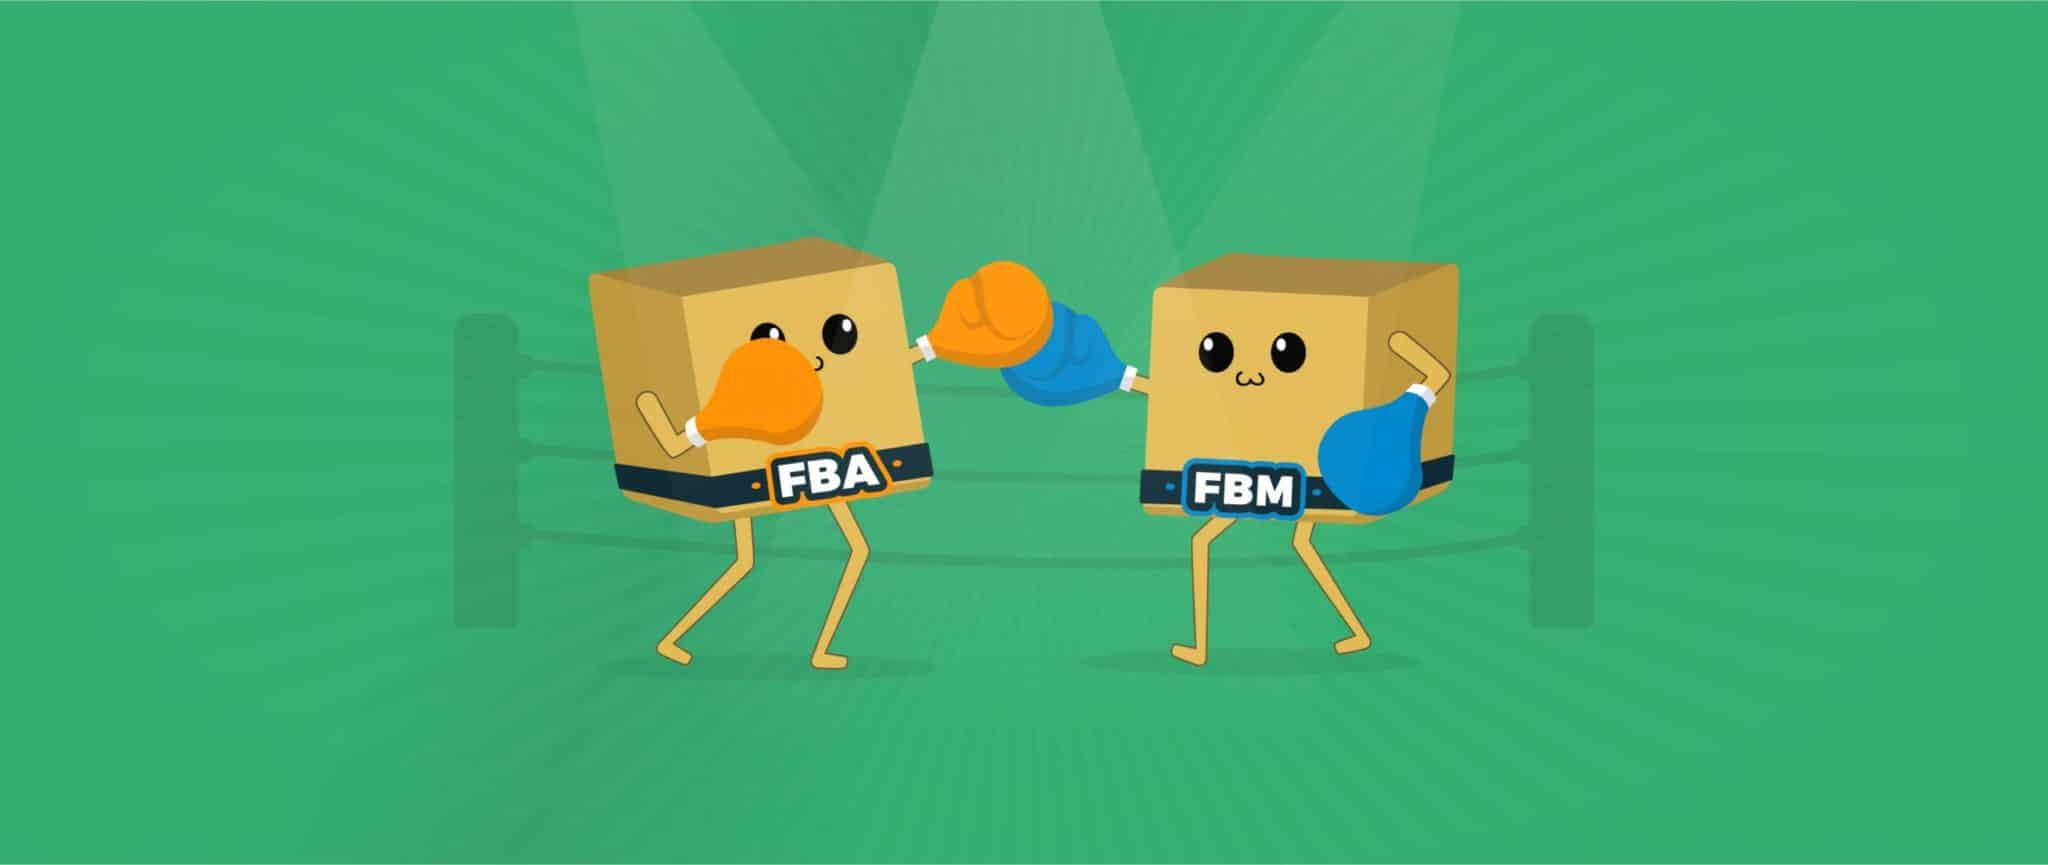 FBA vs. FBM work out their differences in a boxing match.